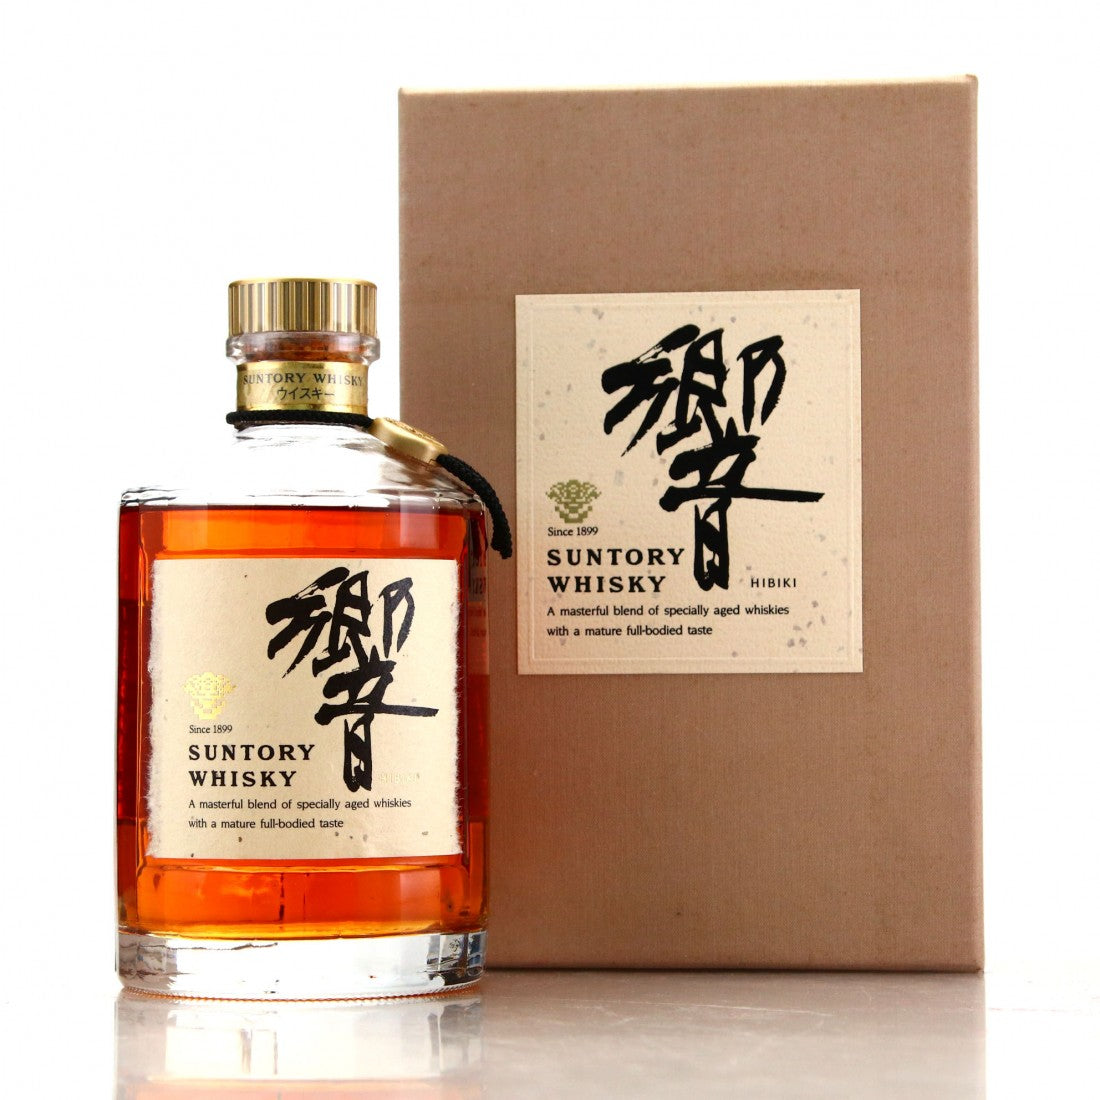 Hibiki 17 Is One Of Japan's Most Sought-After Whiskeys, But It Can Be  Bought Cheap